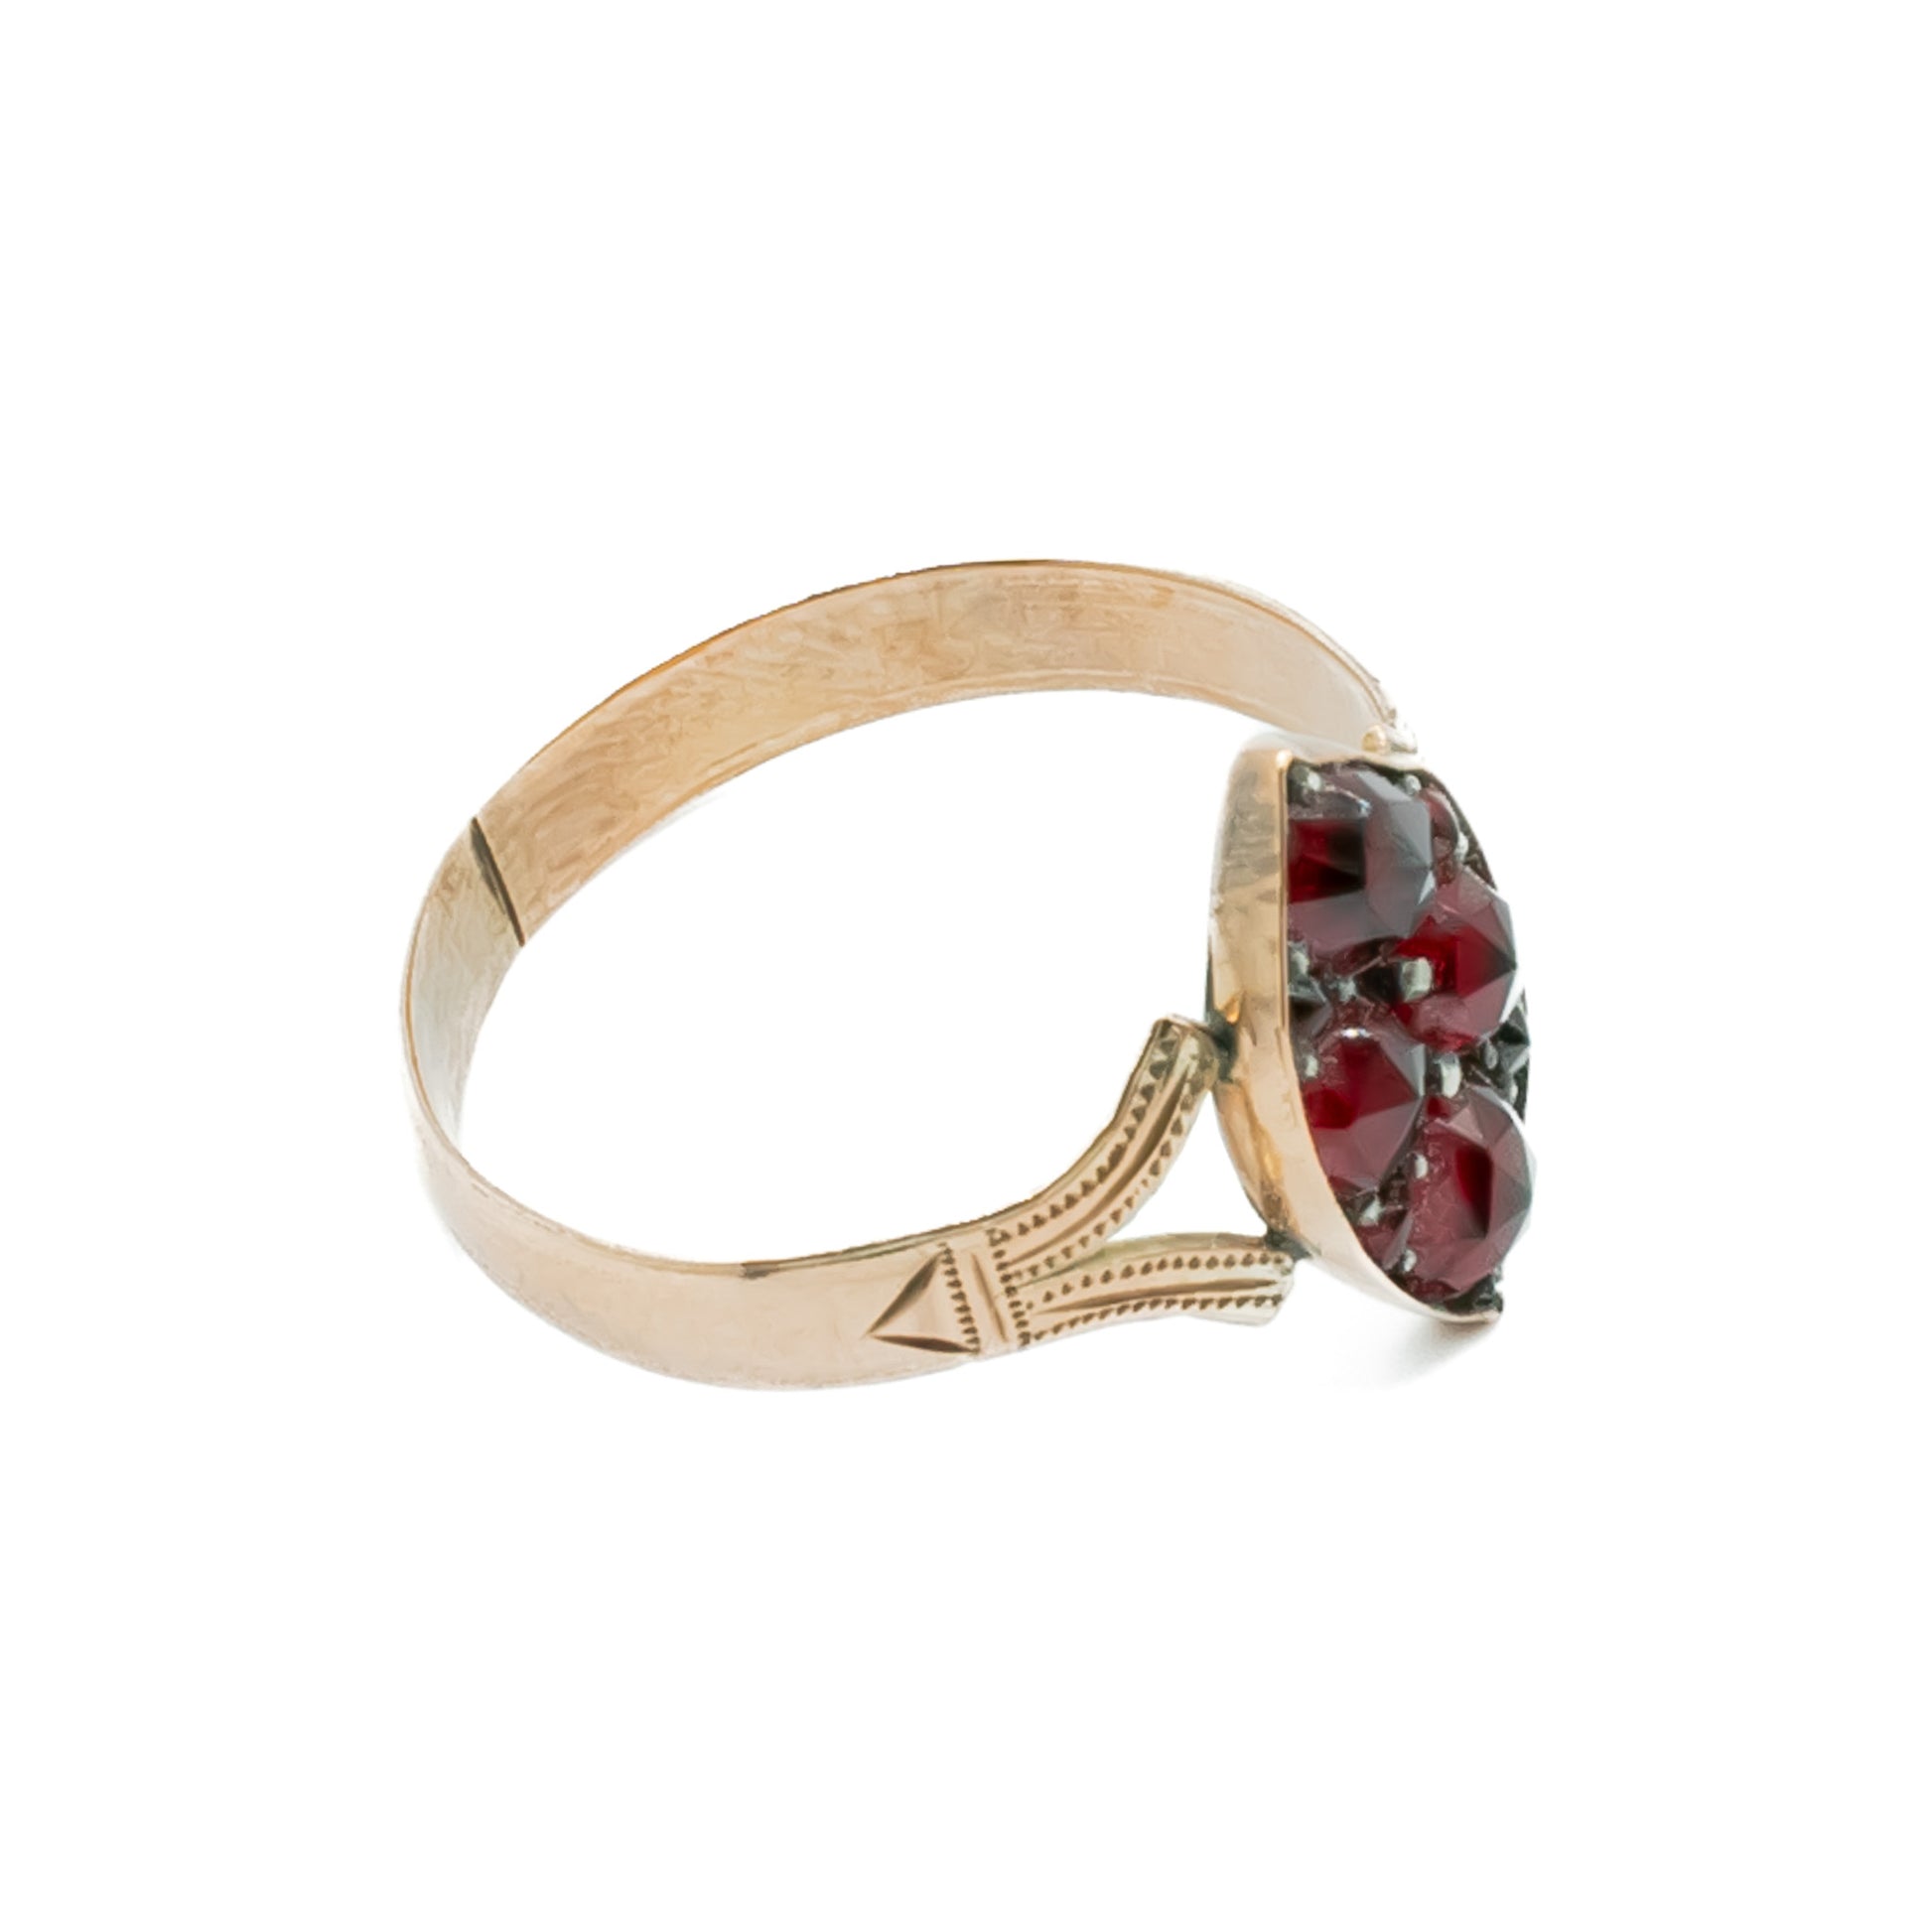 Dainty Victorian 9ct rose gold ring set with eight deep red faceted garnets.